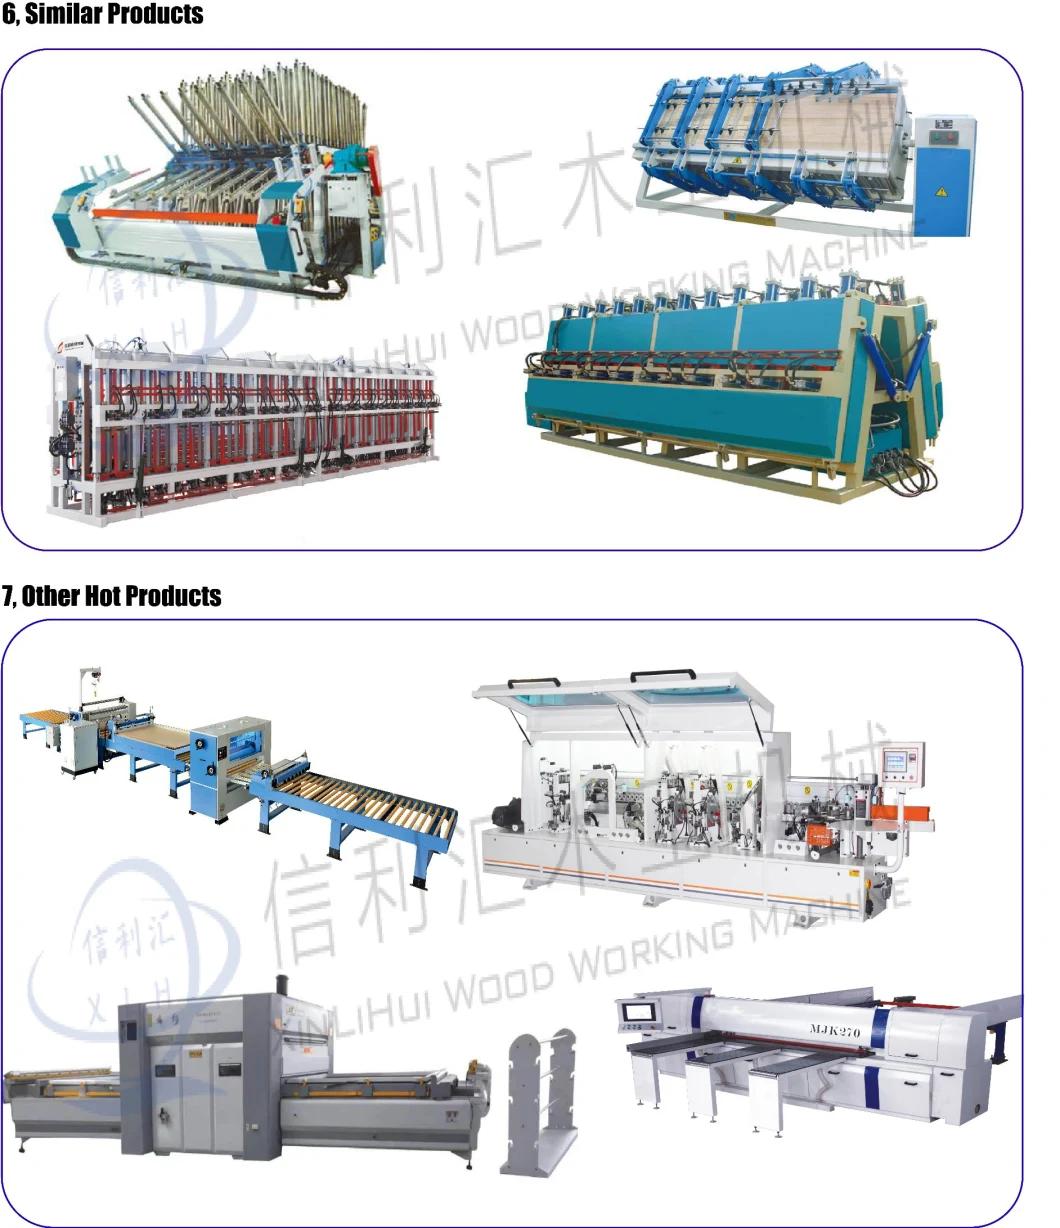 Wood-Working Wood Finger Joint Machine/ Composer Machine for Wood Construction/ Block Board Composing Machine/ Furniture Manufacturing Wood Board Jointer